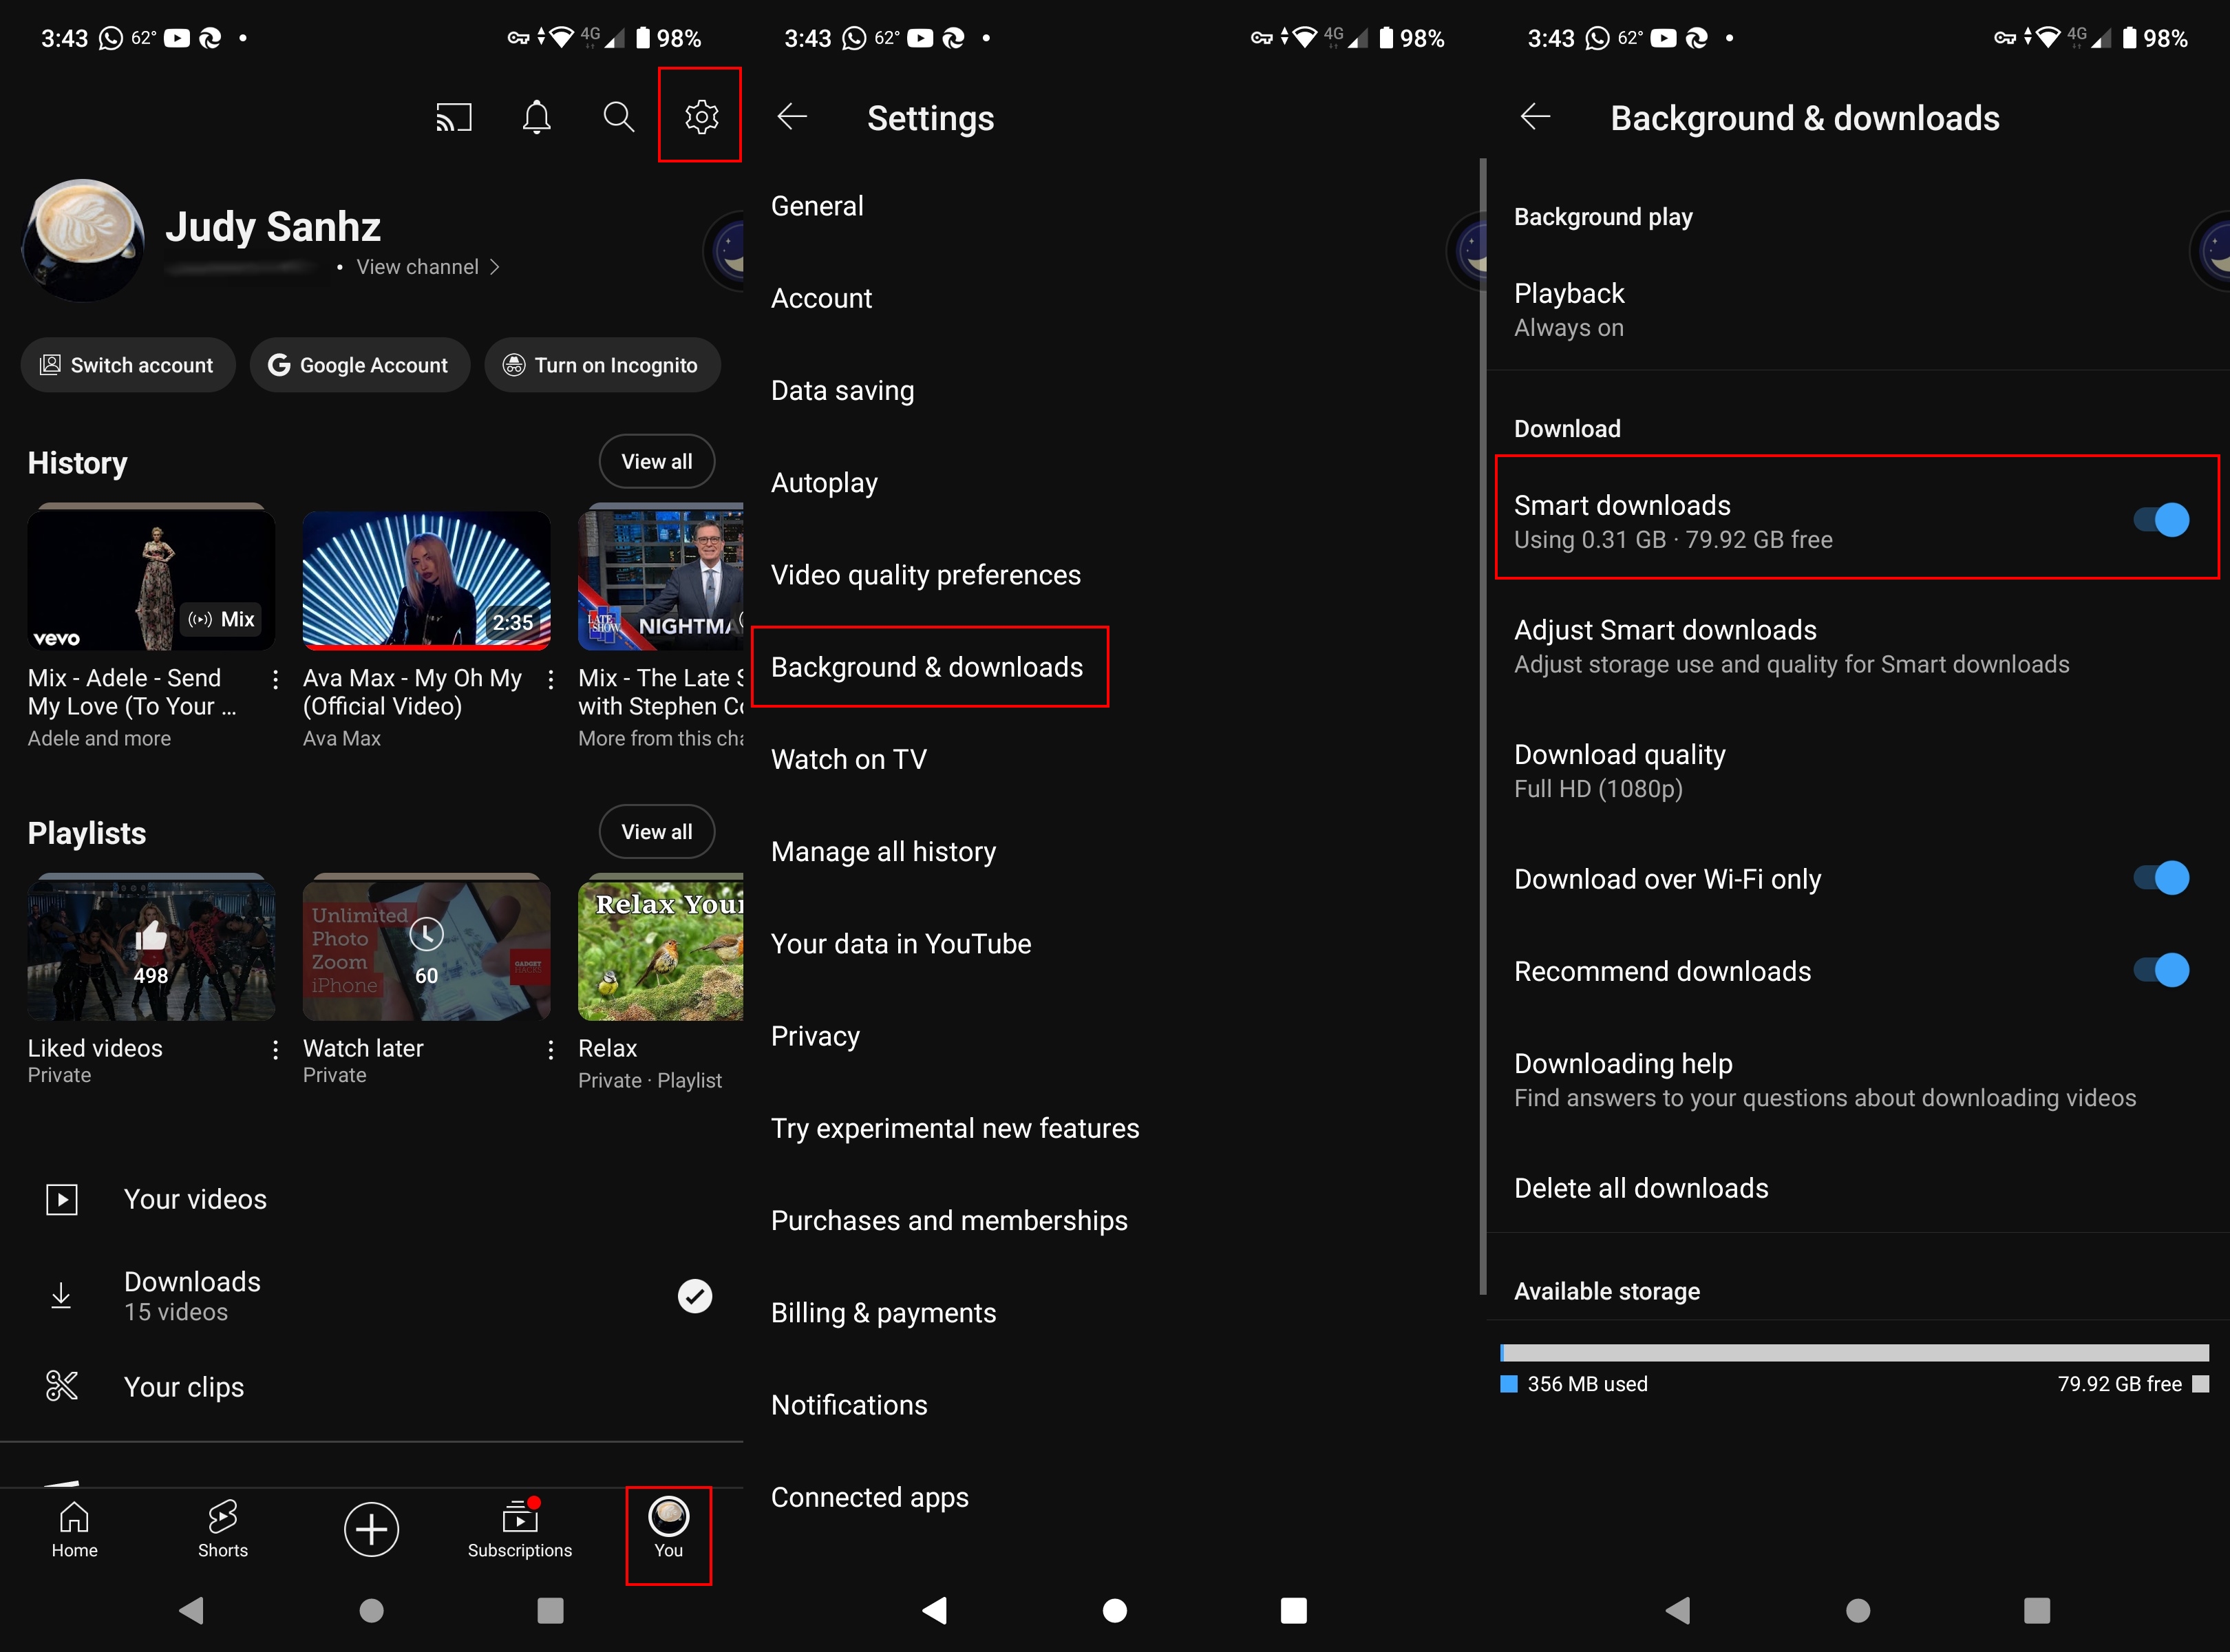 Steps to turn on or off Smart Downloads on YouTube